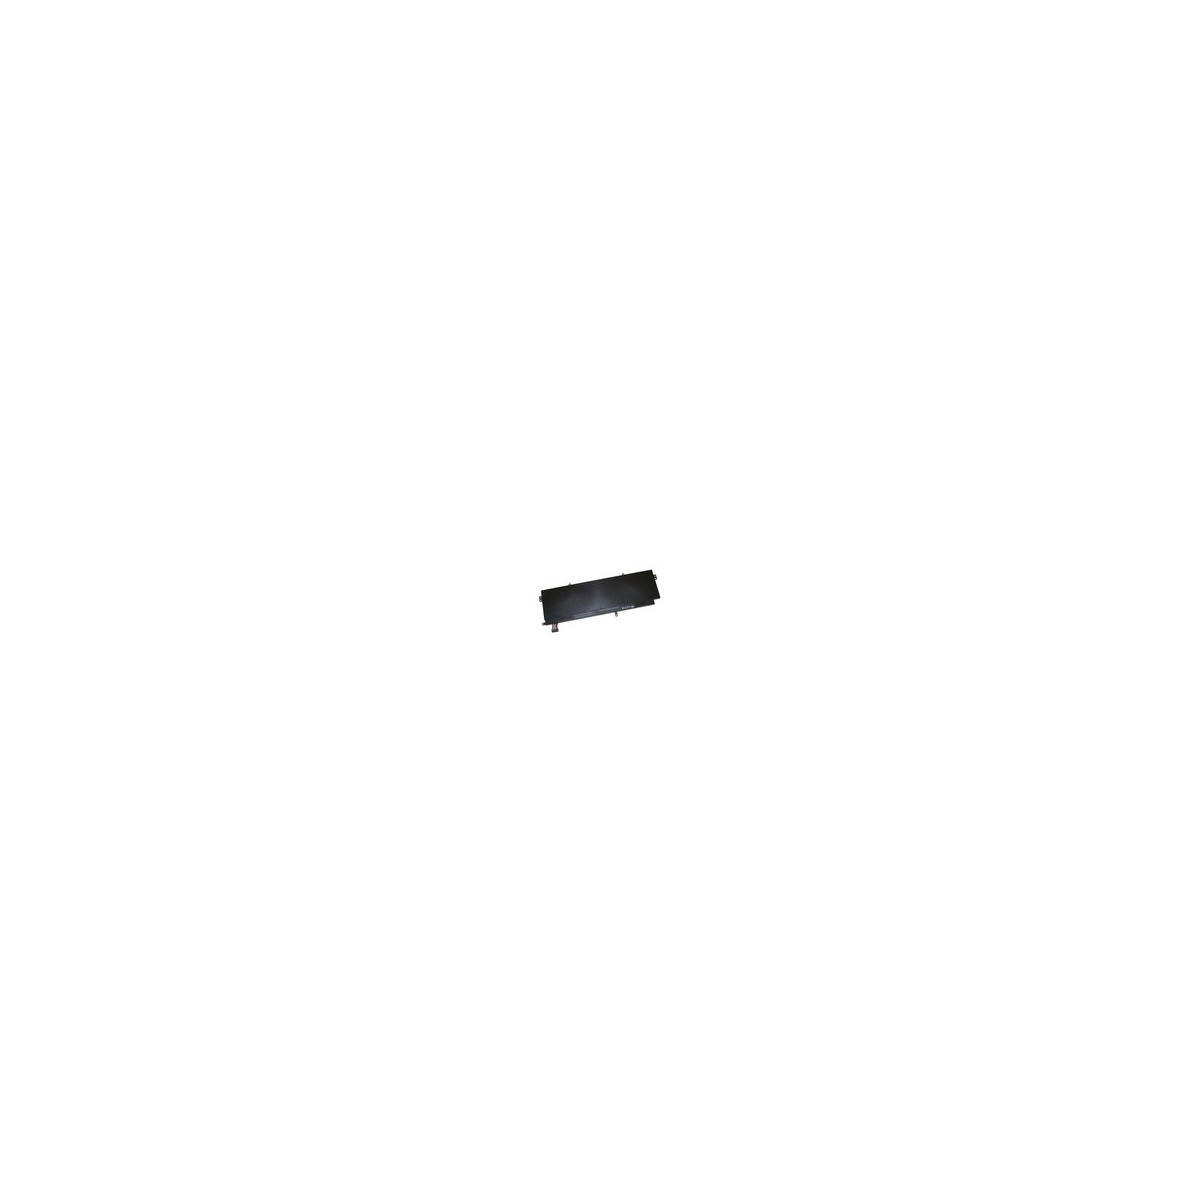 Origin Storage Dell 6 Cell battery for M5520. 11.4V OEM GPM03 - Battery - DELL - M5520